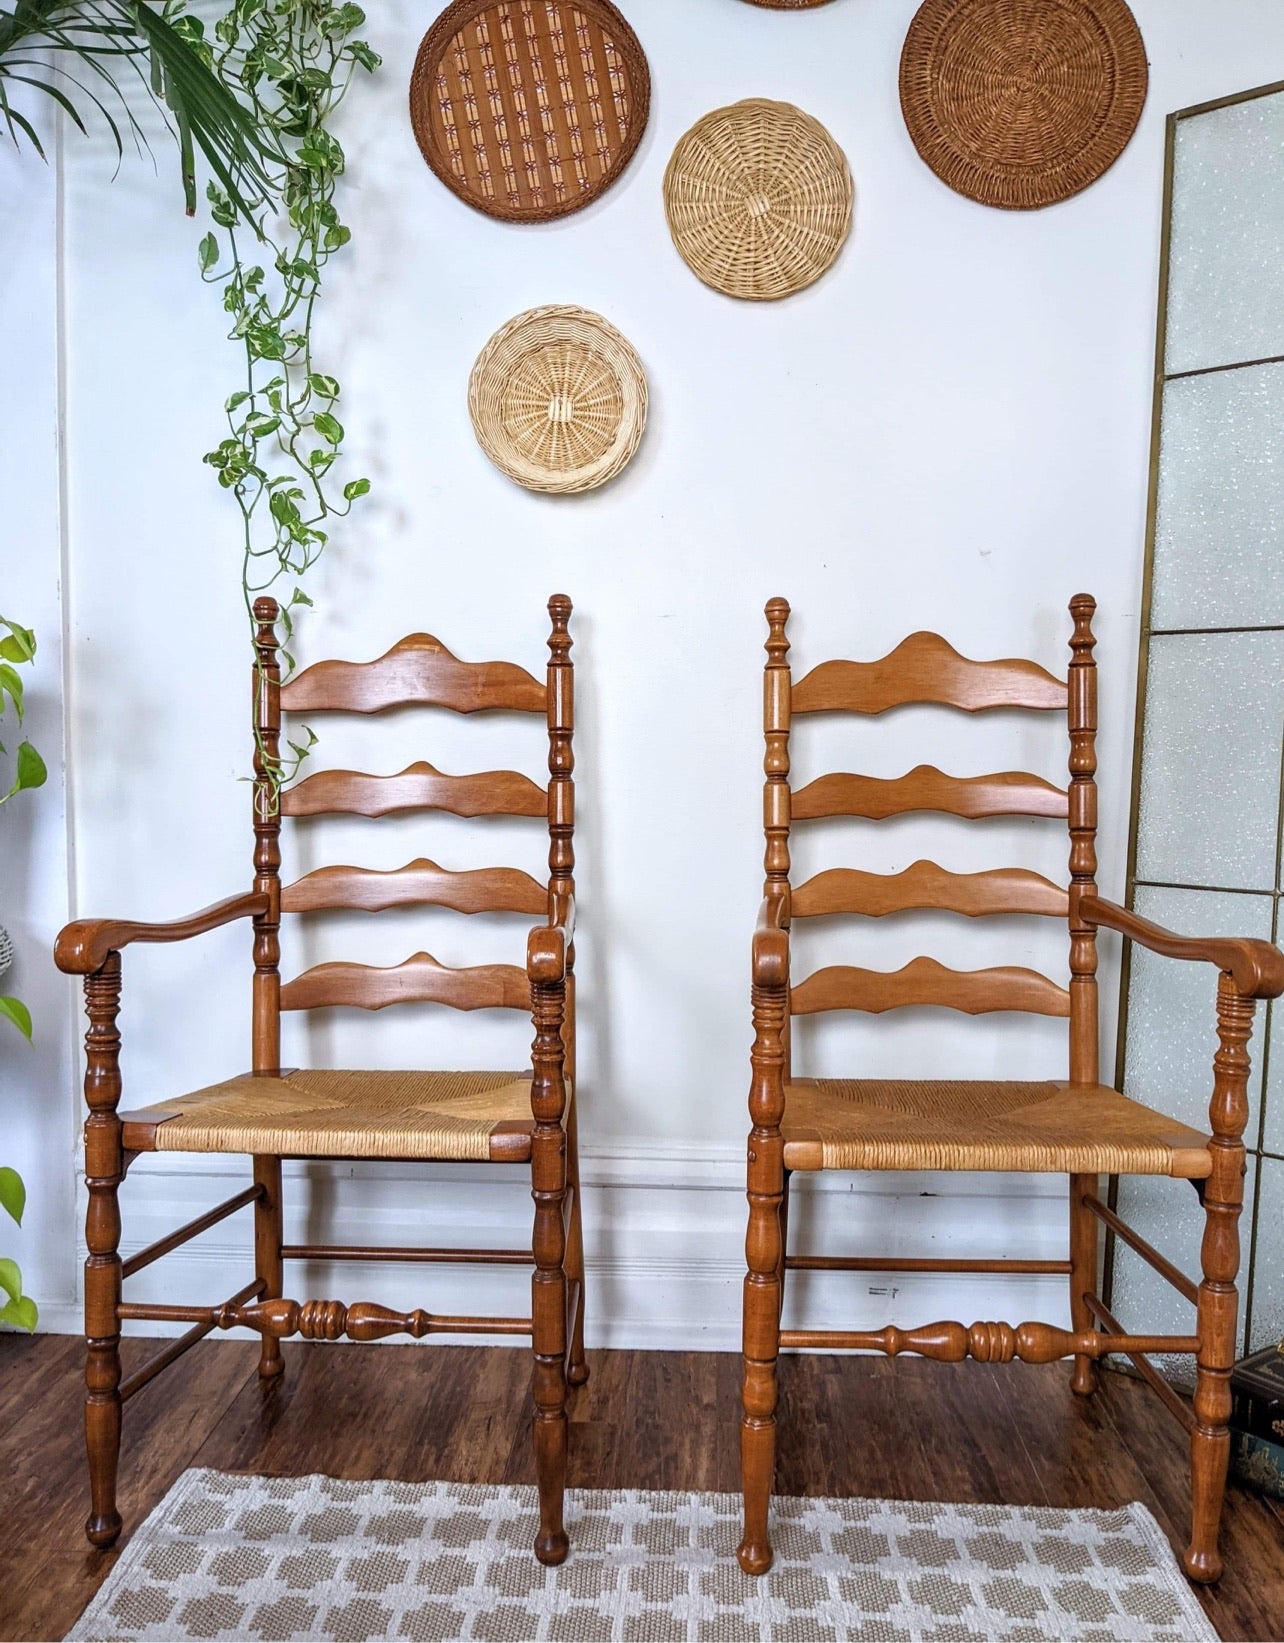 The Ladderback Chairs